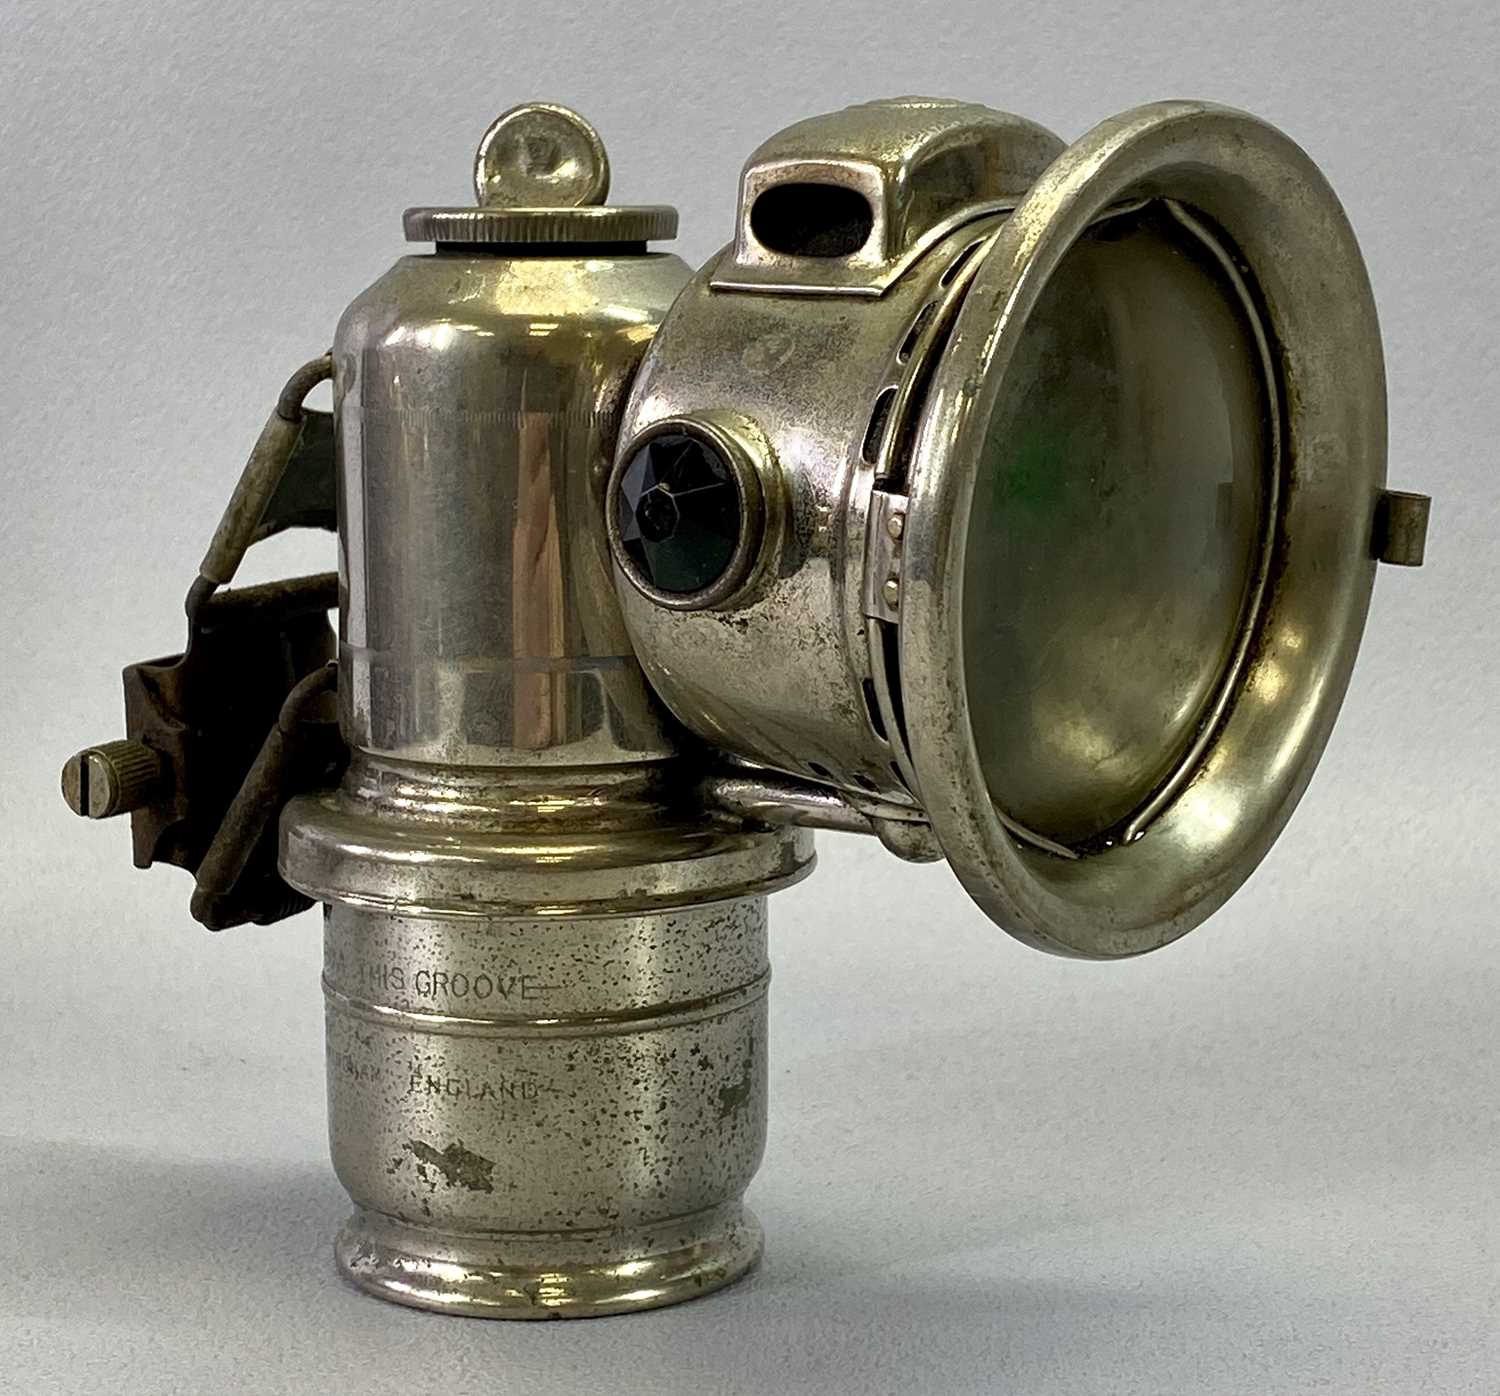 VINTAGE/ANTIQUE VEHICLE LIGHTING - Lucas Calcia Club nickel cased cycle lamp, 15cms H, a ' - Image 2 of 3